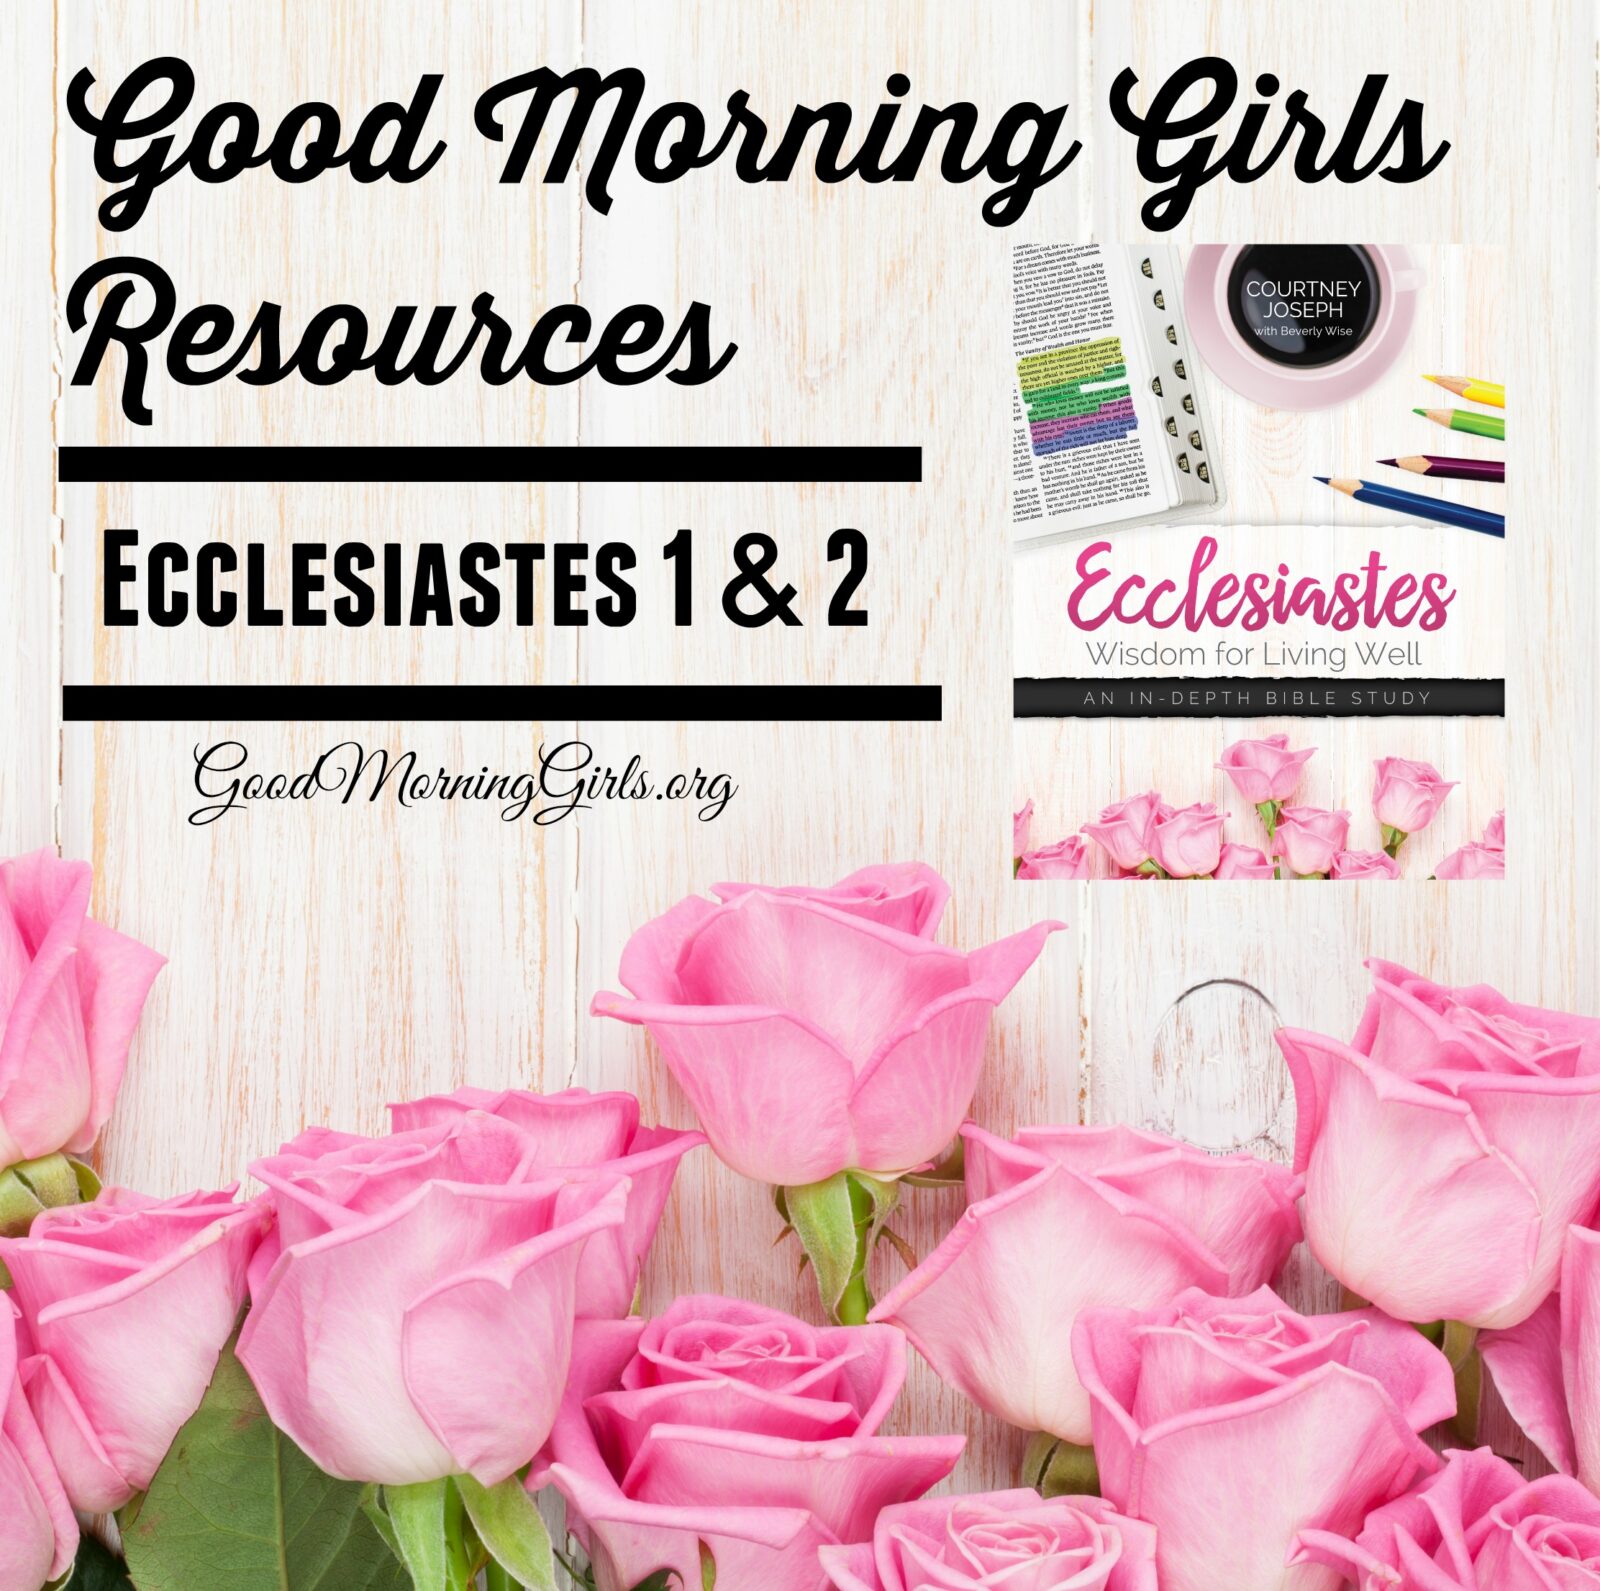 Join Good Morning Girls as we read through the Bible cover to cover one chapter a day. Here are the resources you need to study the Book of Ecclesiastes. #Biblestudy #Ecclesiastes #WomensBibleStudy #GoodMorningGirls